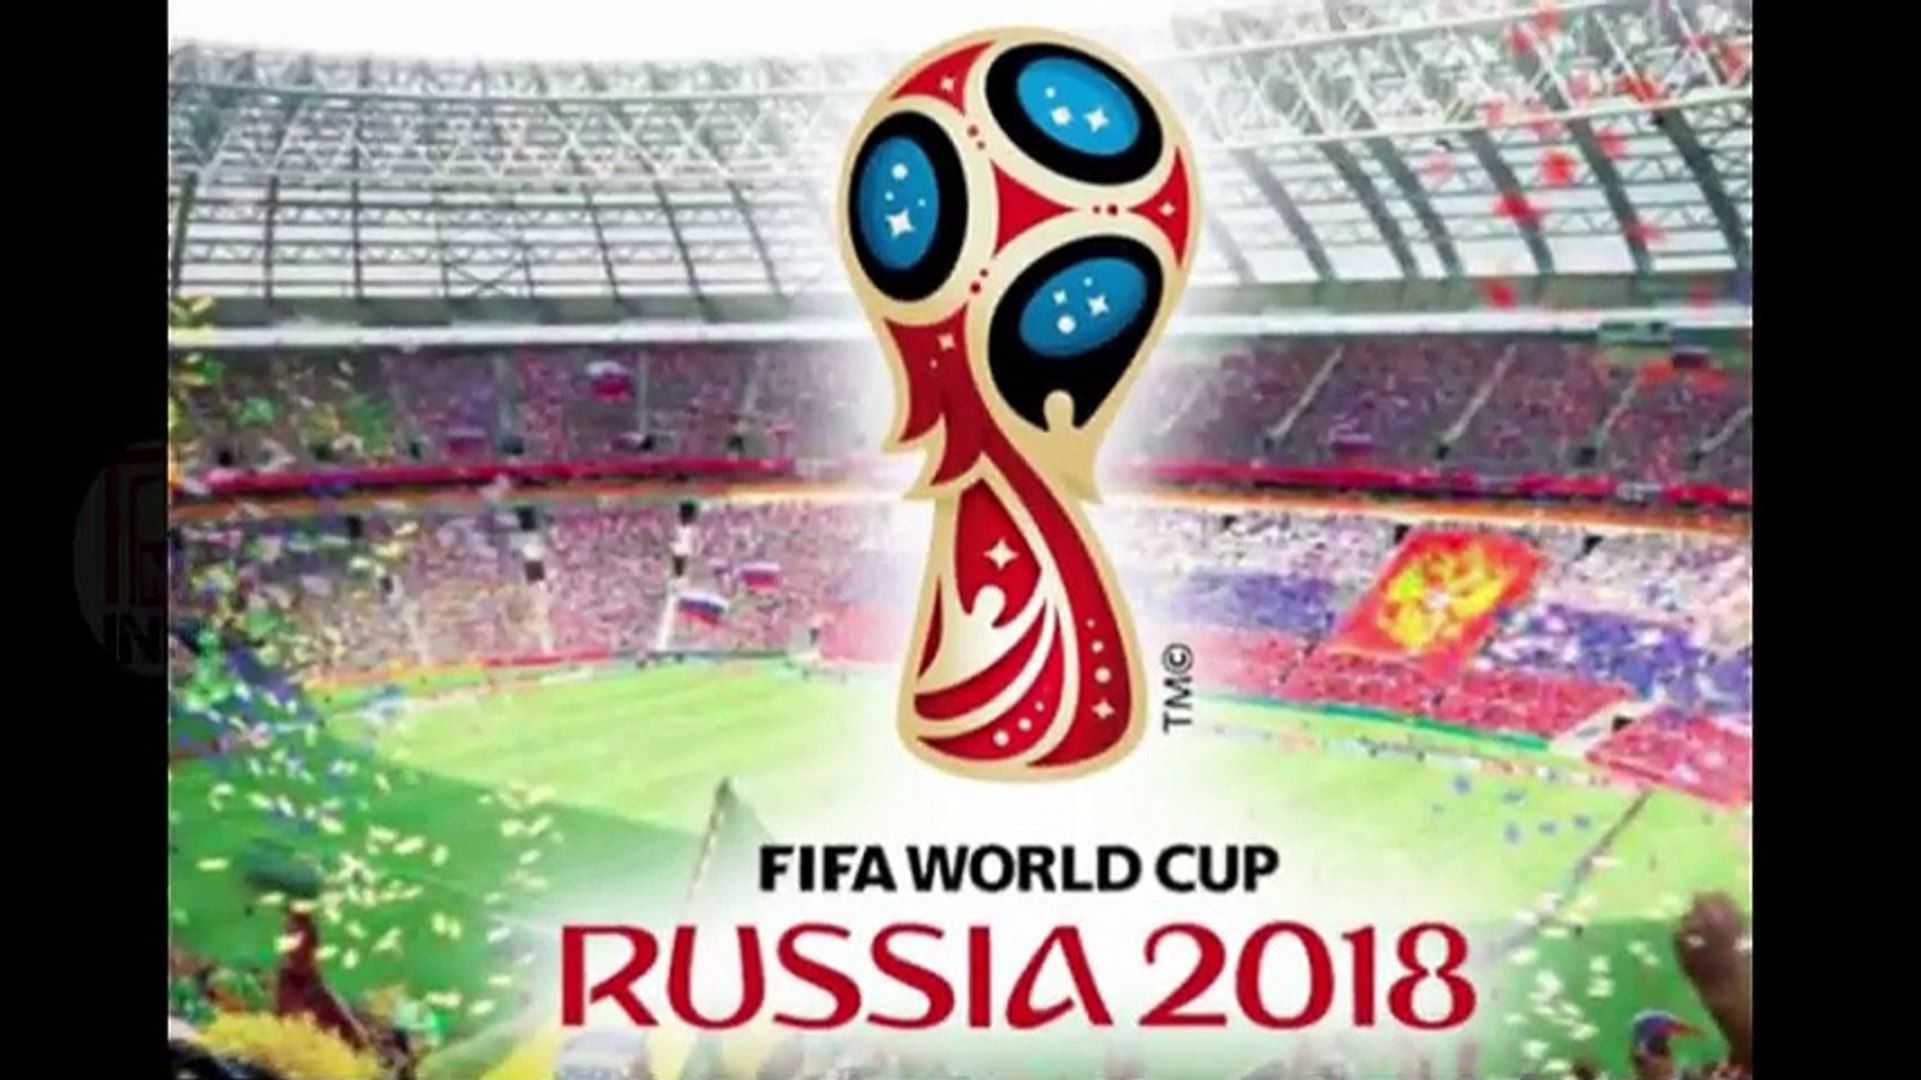 FIFA World Cup 2018 Broadcast Rights For FIFA World Cup 2018